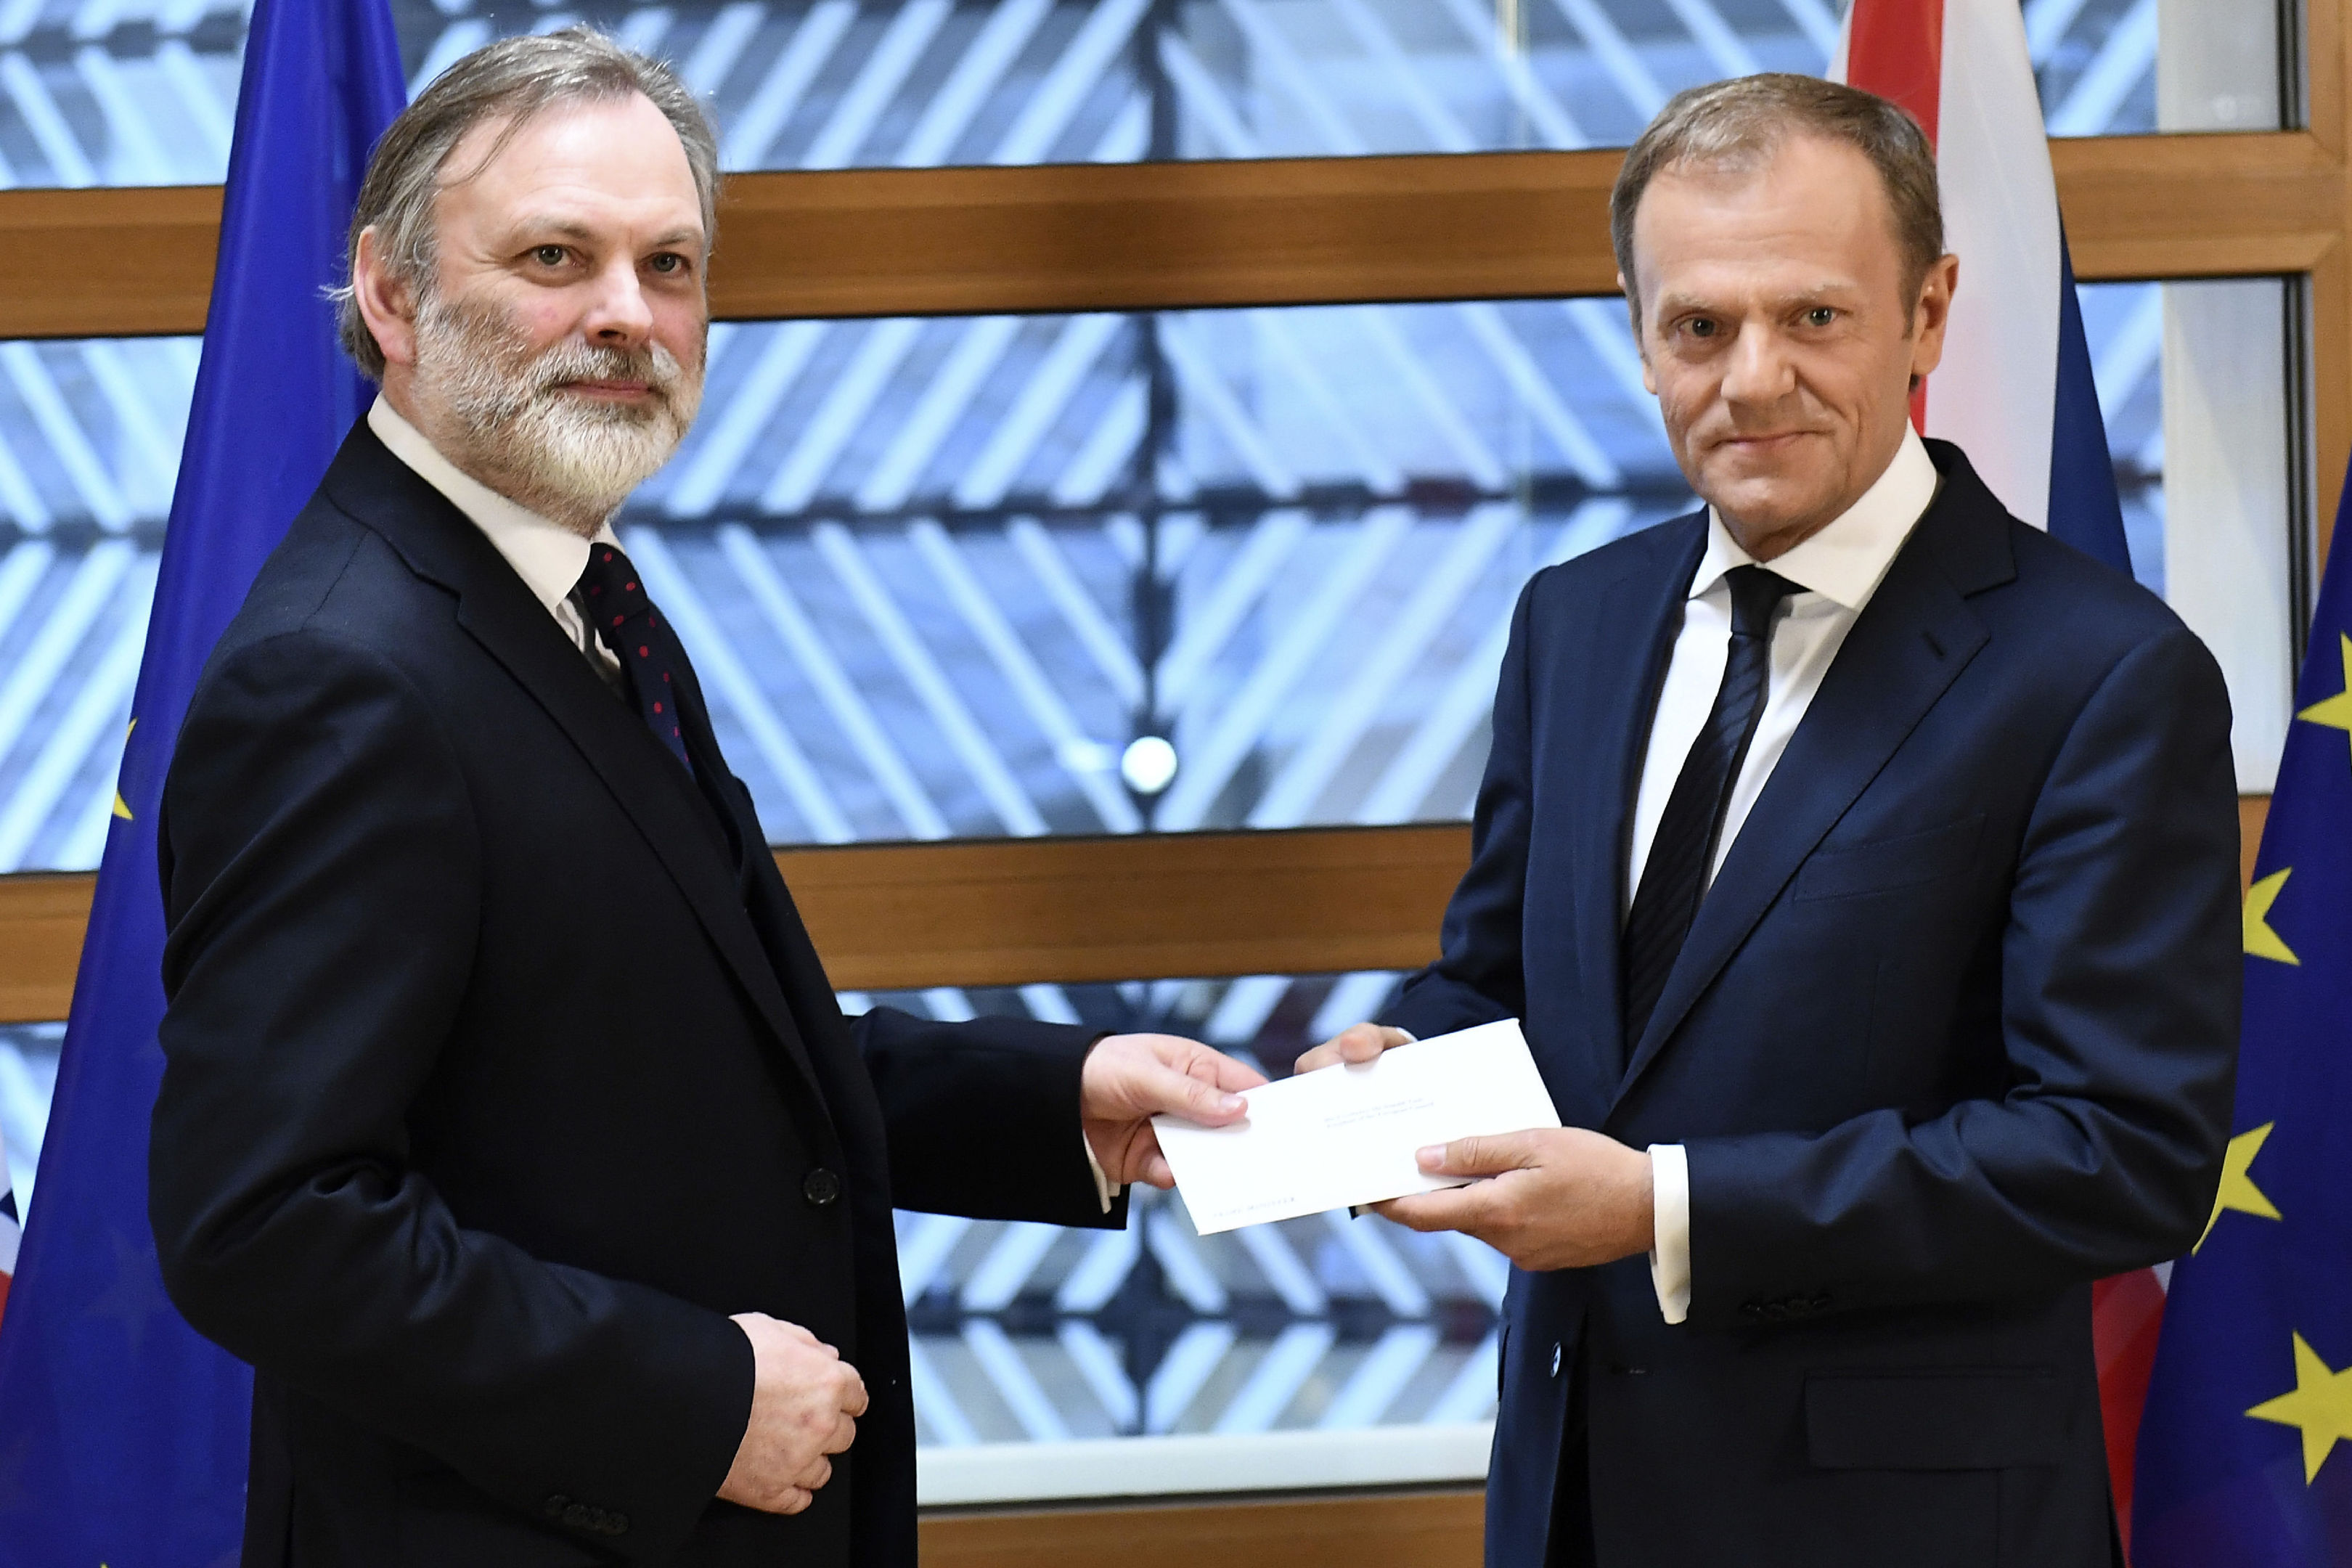 EU Council President Donald Tusk, right, gets Theresa May's formal notice to leave the bloc under Article 50 from UK Permanent Representative to the EU Tim Barrow (Emmanuel Dunand, Pool via AP)